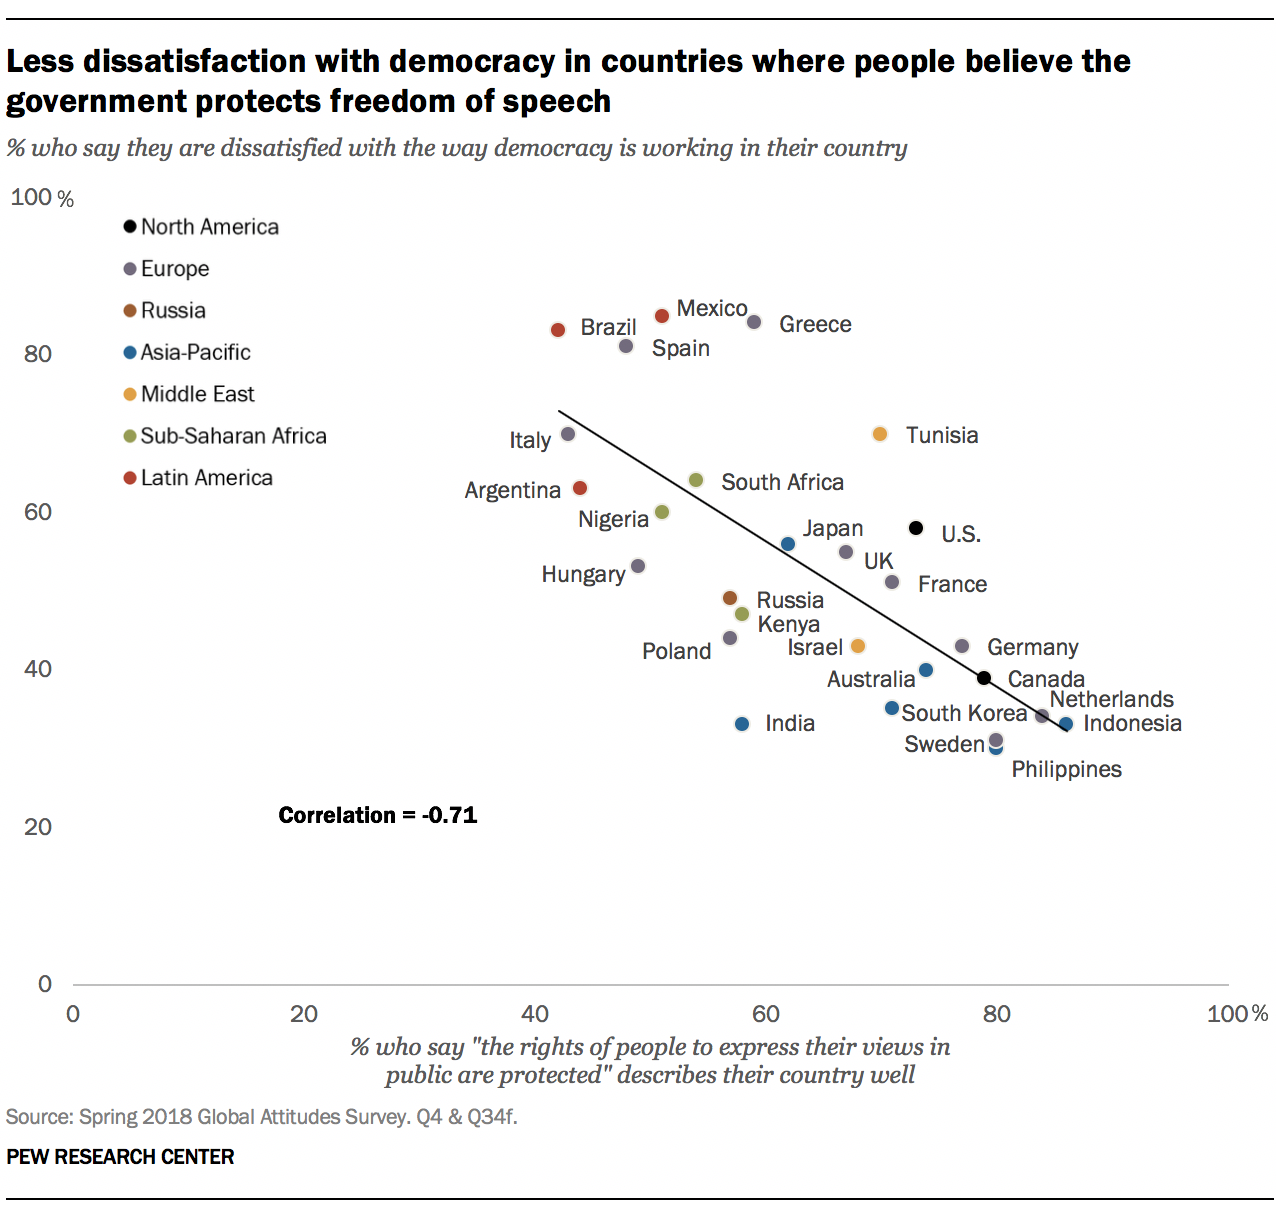 Less dissatisfaction with democracy in countries where people believe the government protects freedom of speech